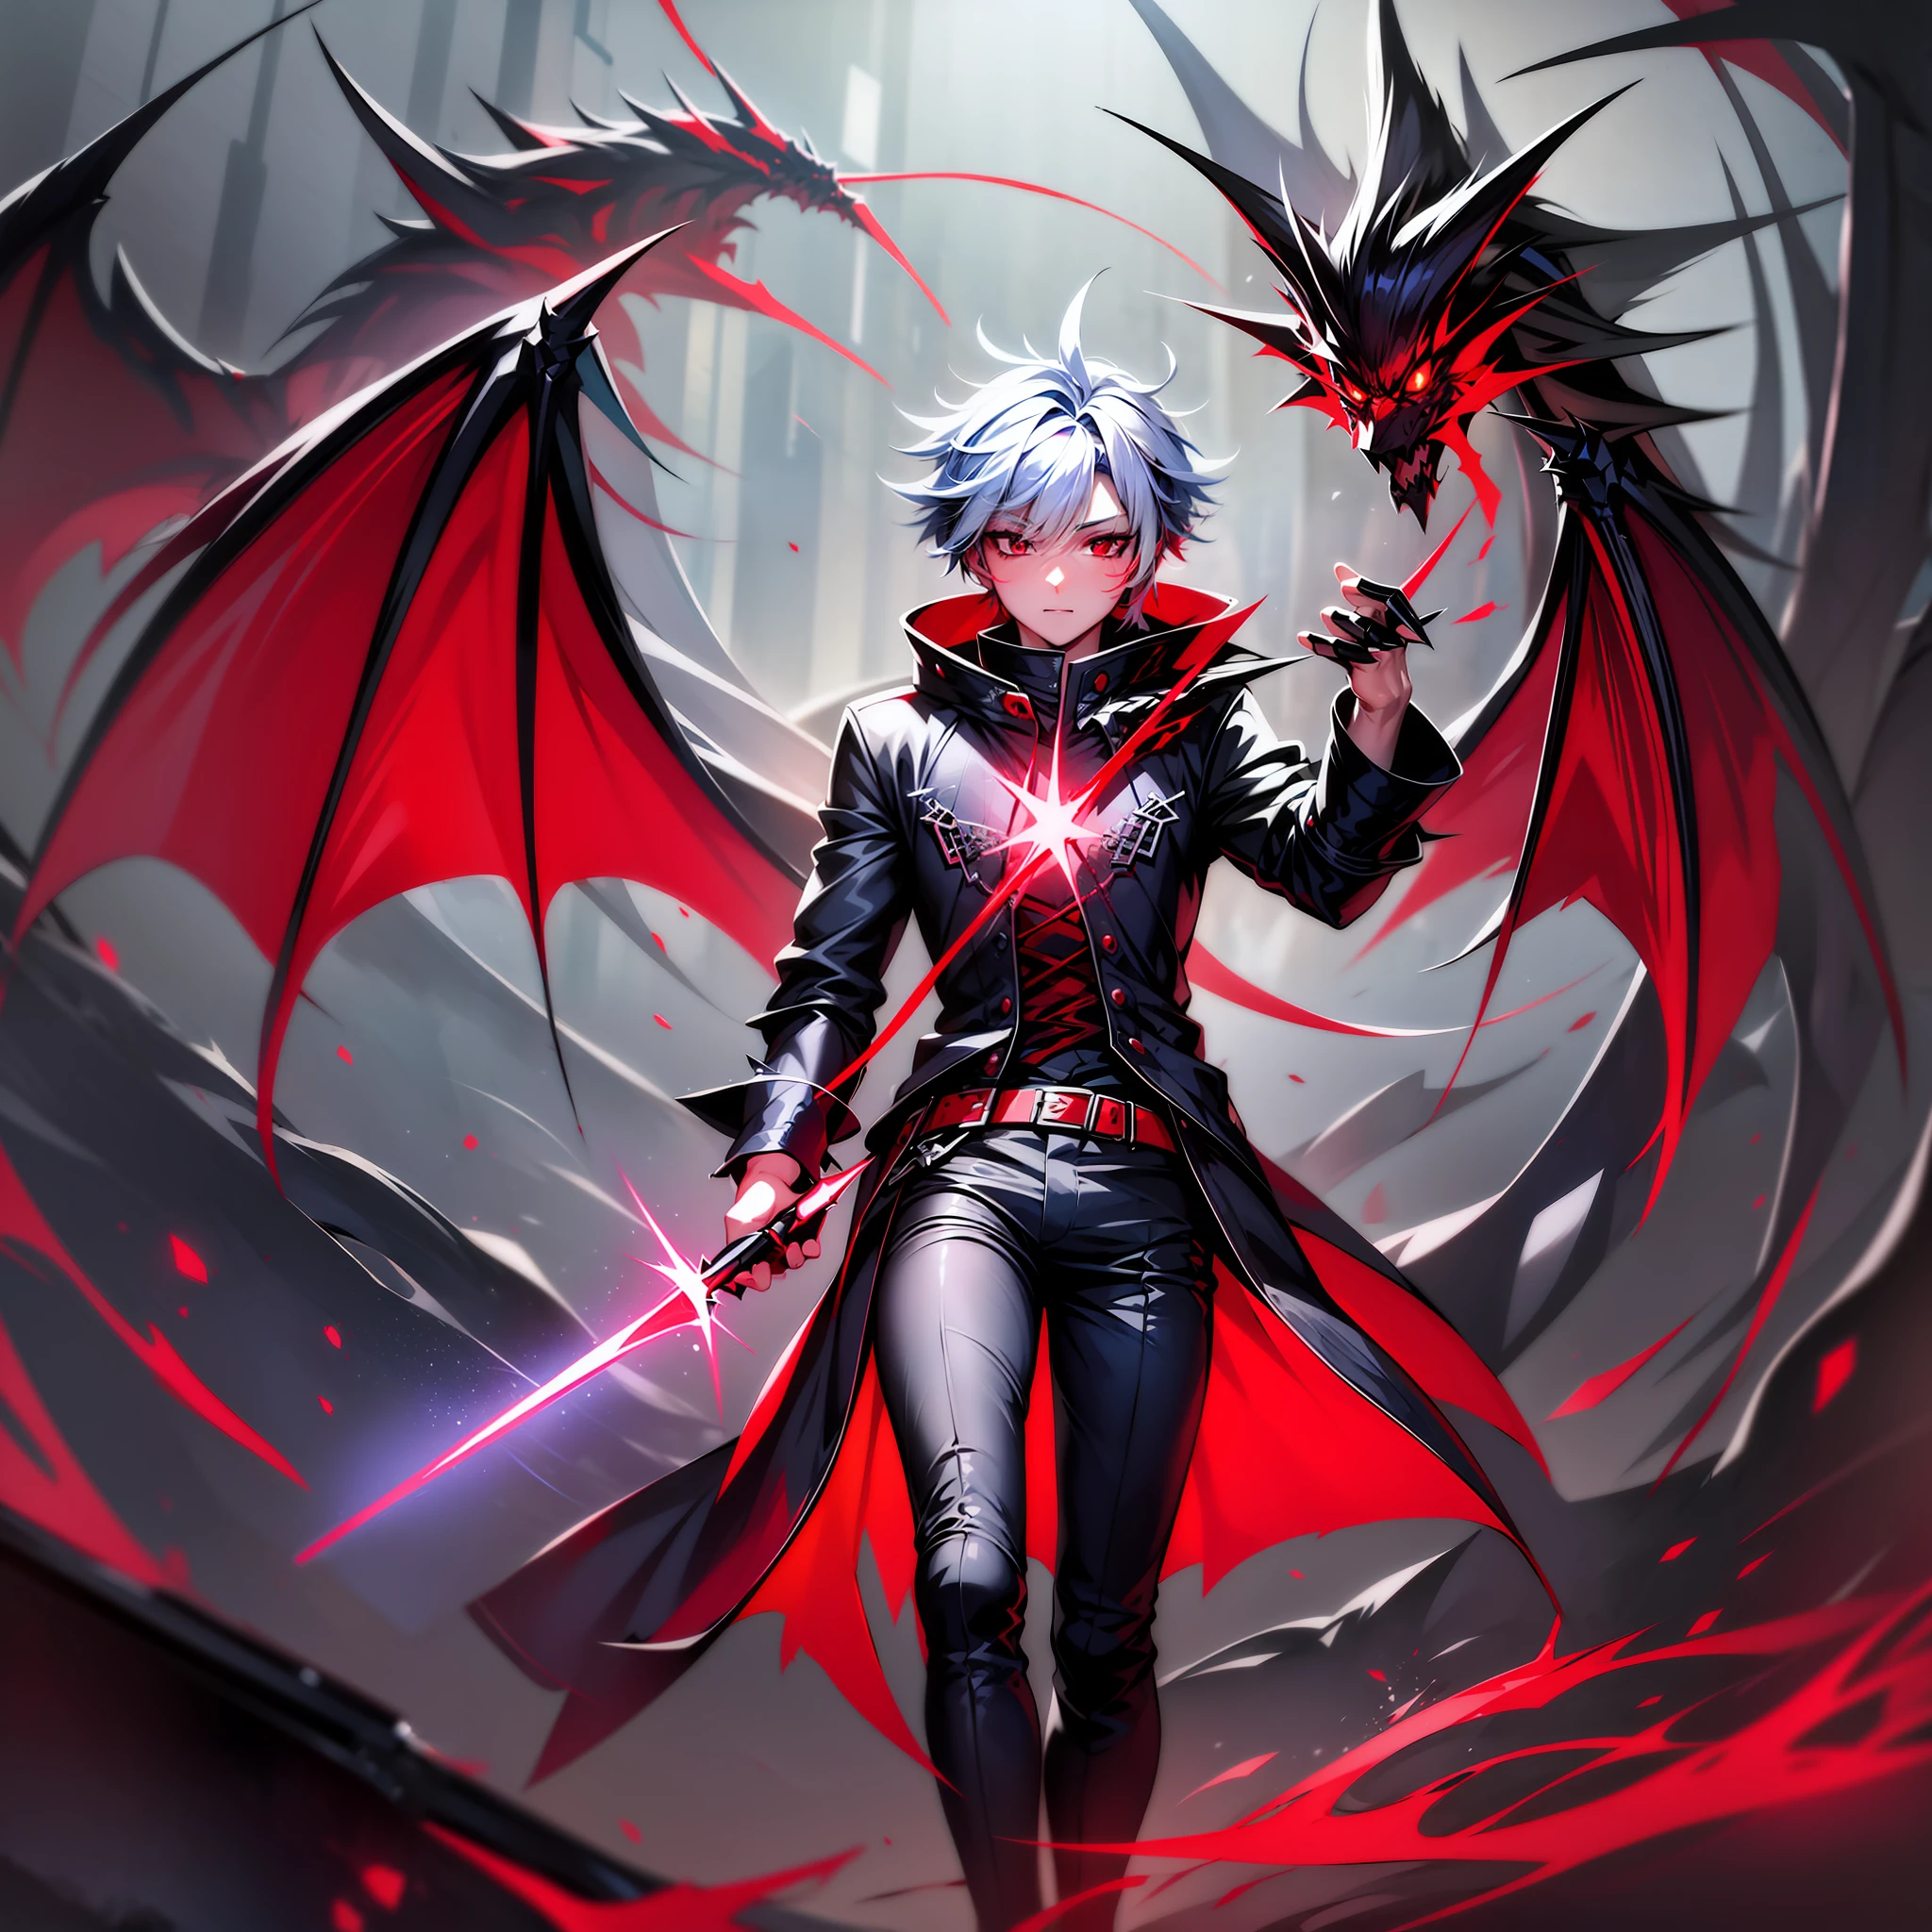 draw a boy with red clothing with black spiky white hair white eyes with 1/4 blue,in his right hand a wand releasing a black magic,full body in an environment with dragons and wolves